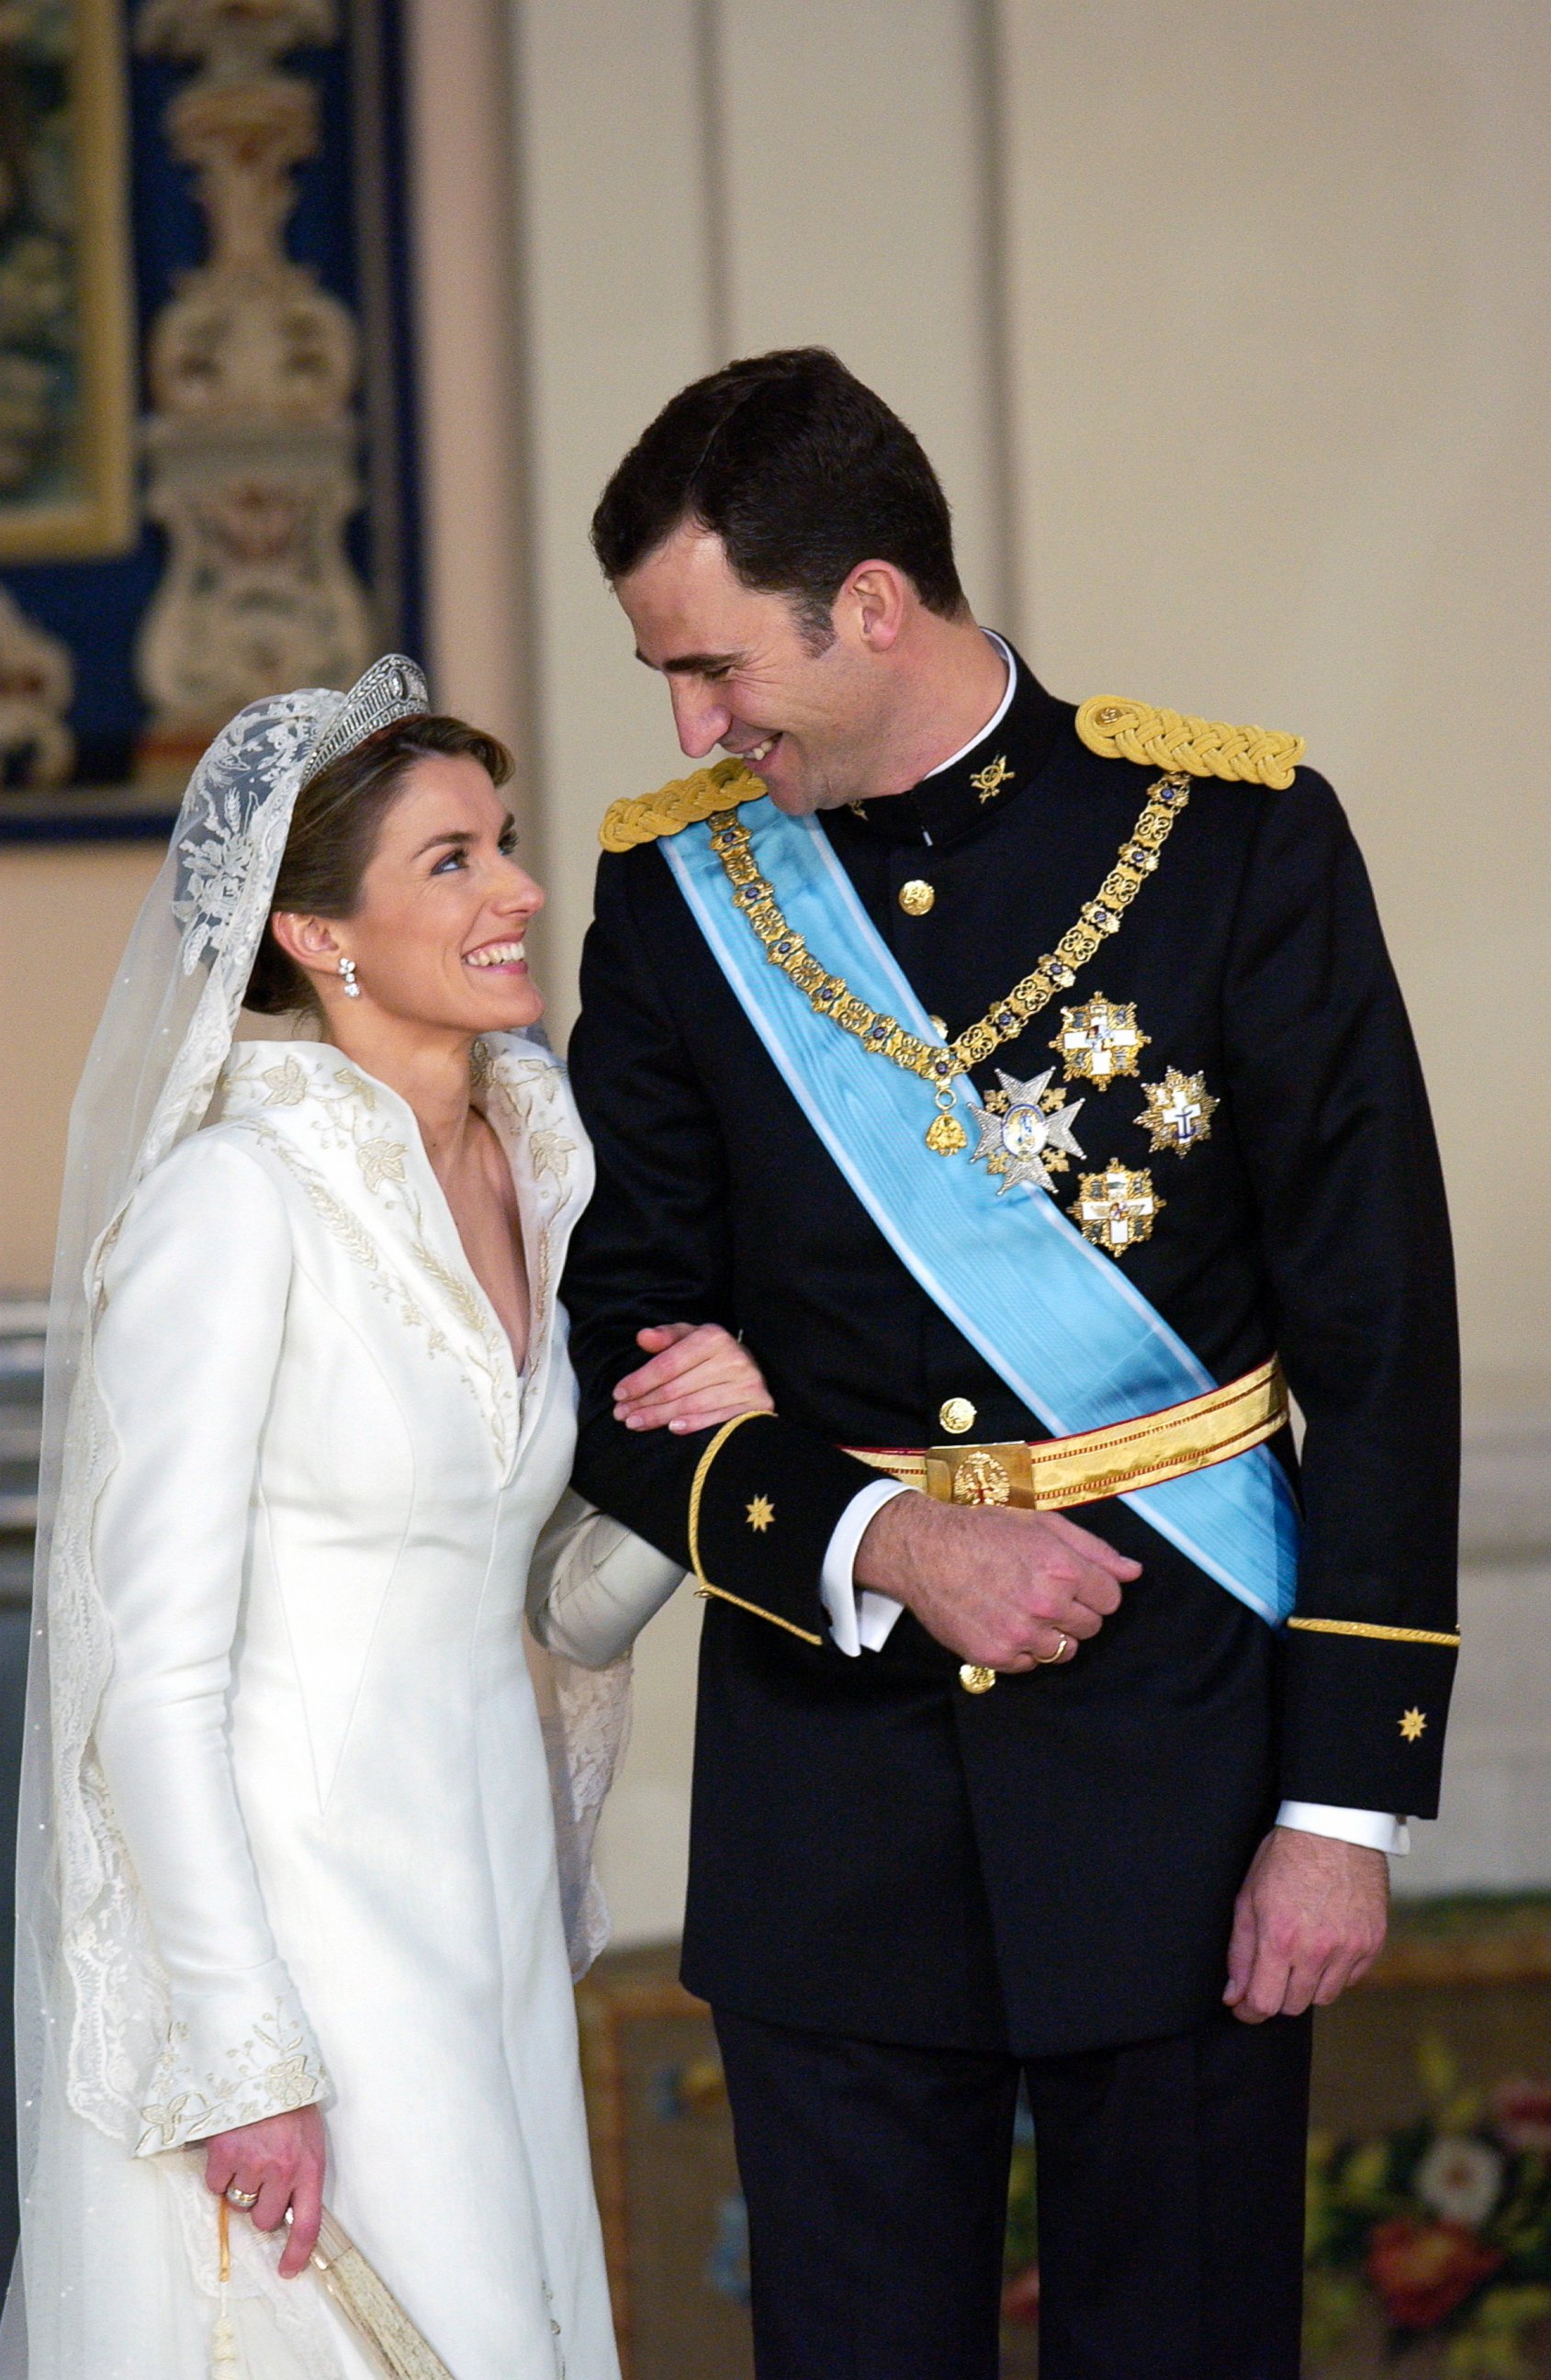 PHOTO: Crown Prince Felipe Of Spain, Prince Of The Asturias, laughing with his bride Crown Princess Letizia in the royal palace after their wedding, May 22, 2004. 